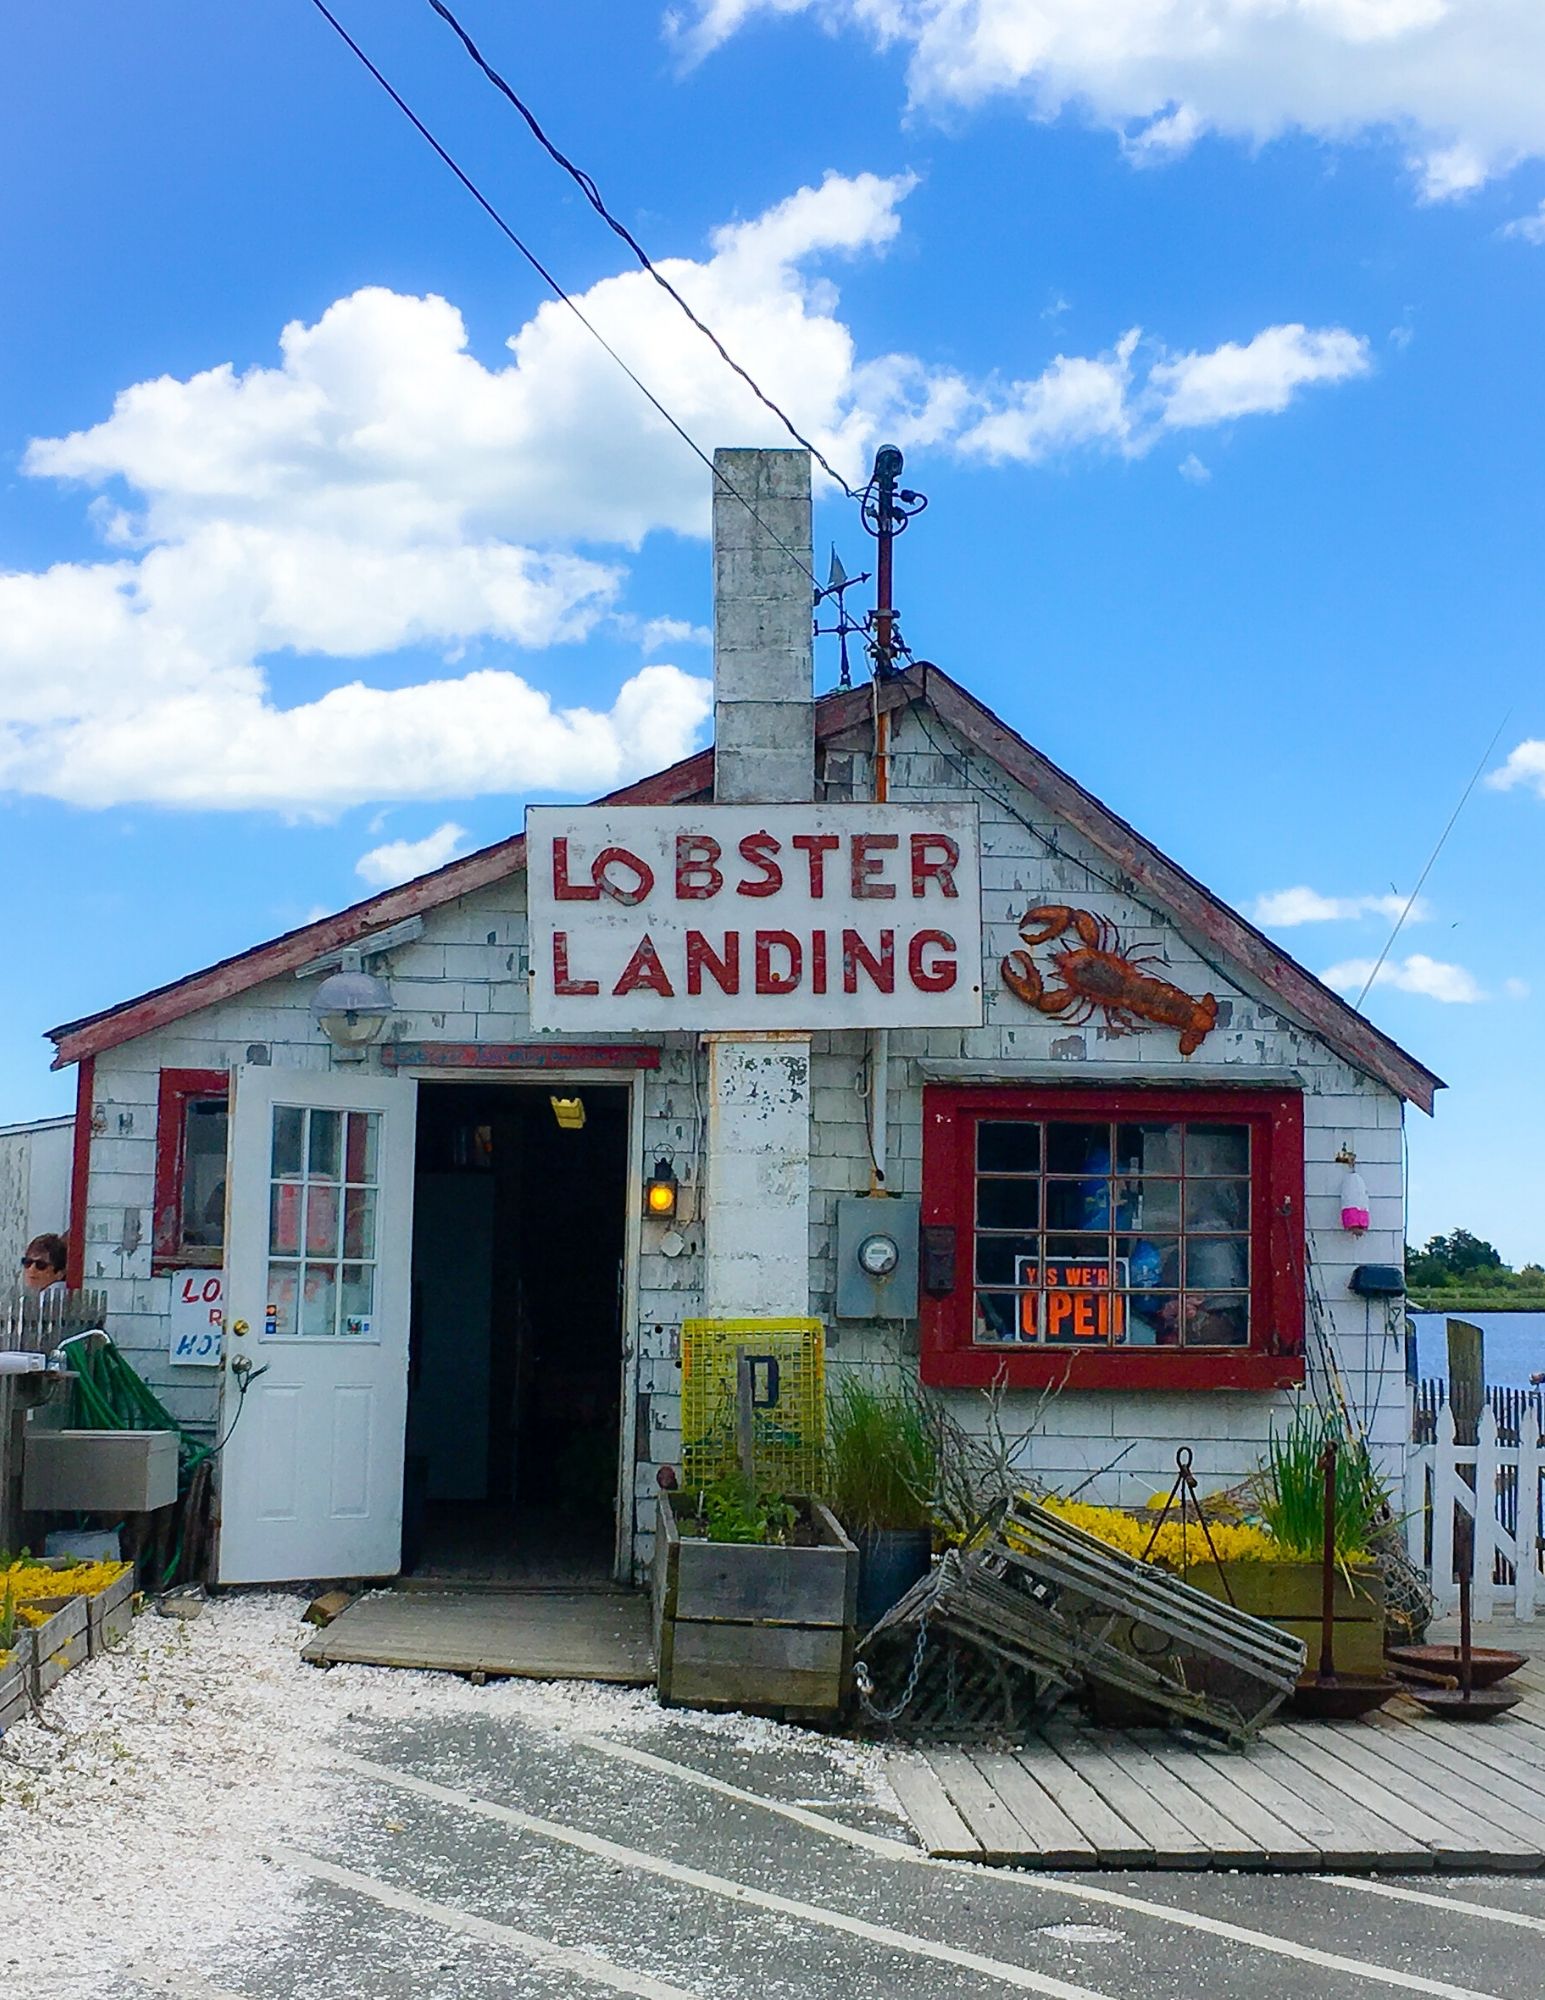 Grab a lobster roll from our favorite CT Shack Lobster Landing in Clinton, CT